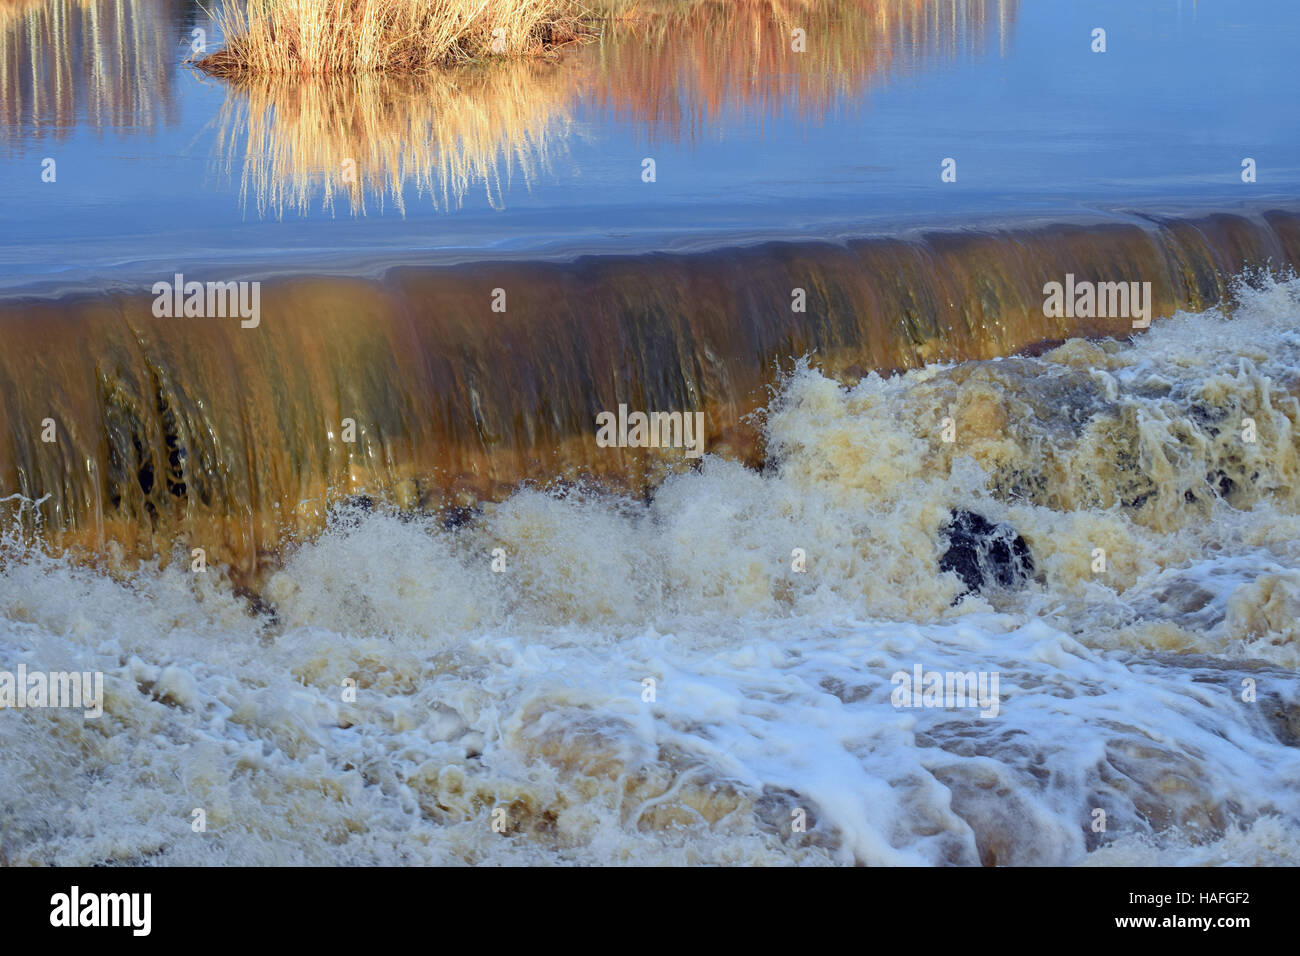 Flowing water Stock Photo